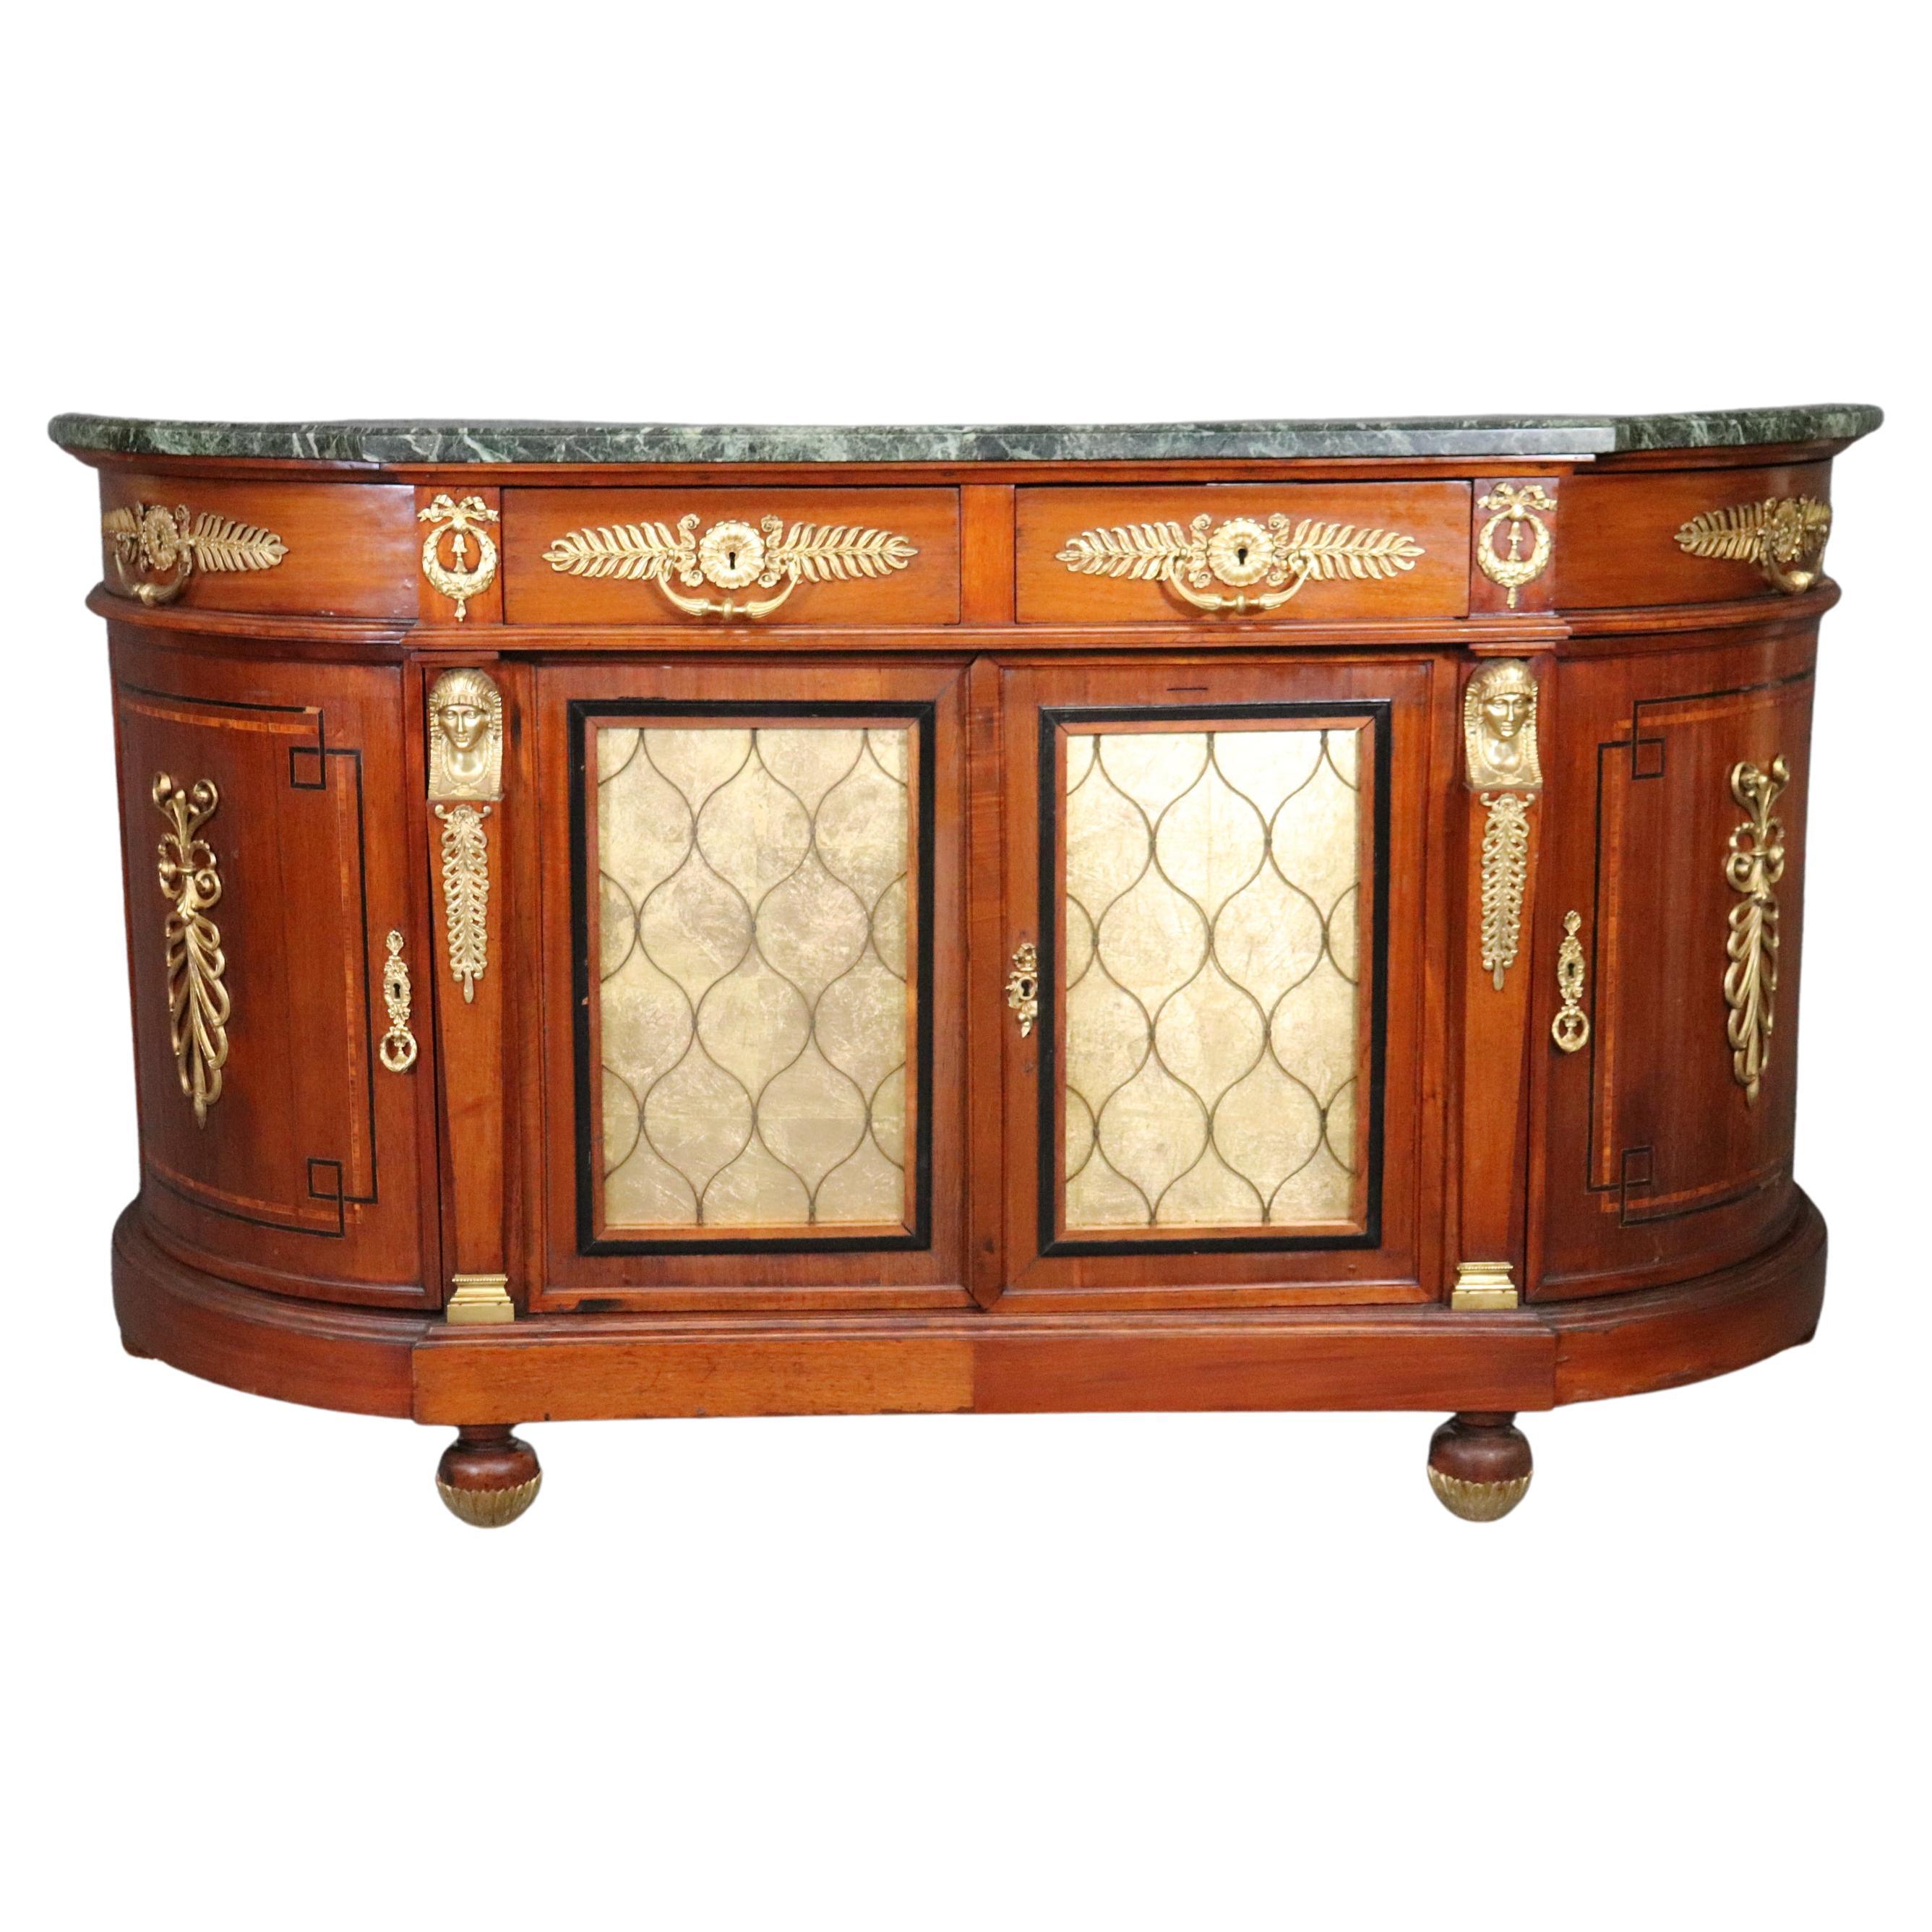 French Empire Style Bronze Mounted Marble Top Walnut Sideboard Eglomise Doors